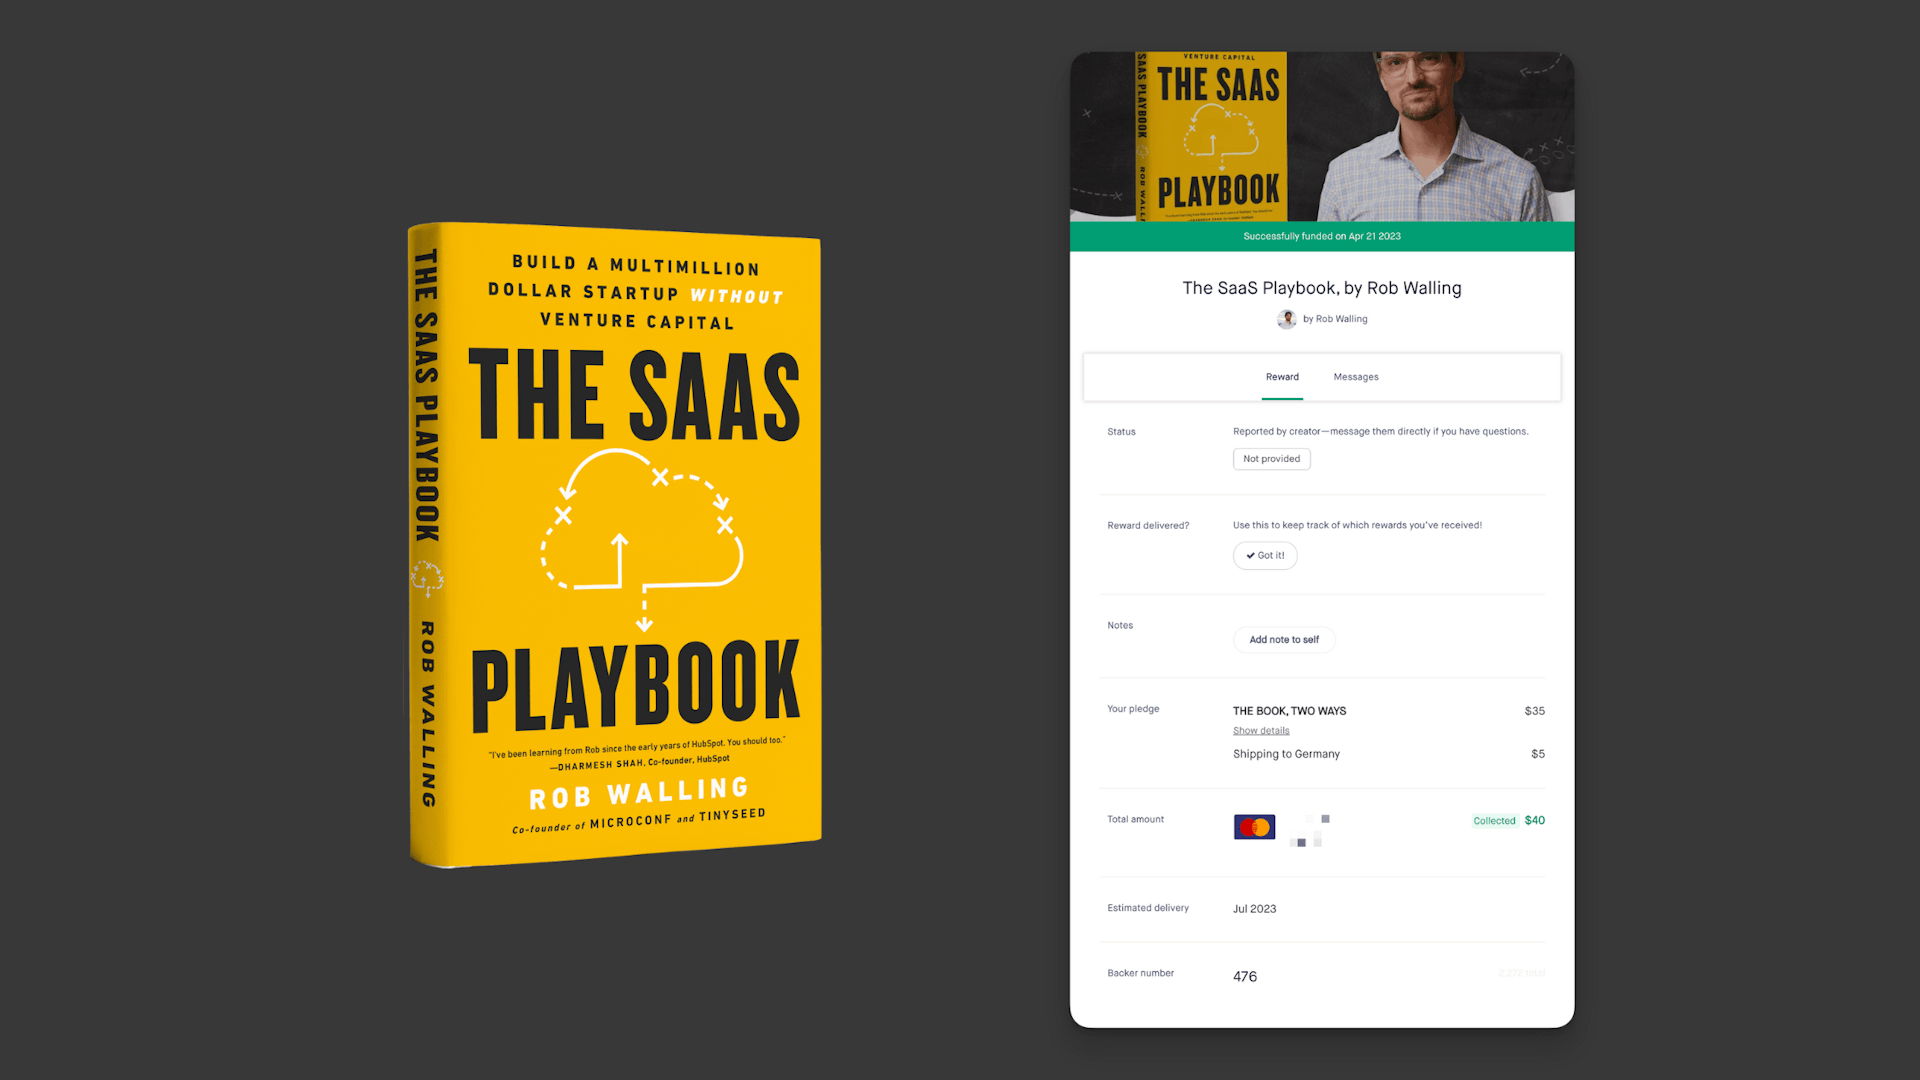 My Top 10 Essential Insights from The SaaS Playbook: A Review of Rob Walling's Latest Book